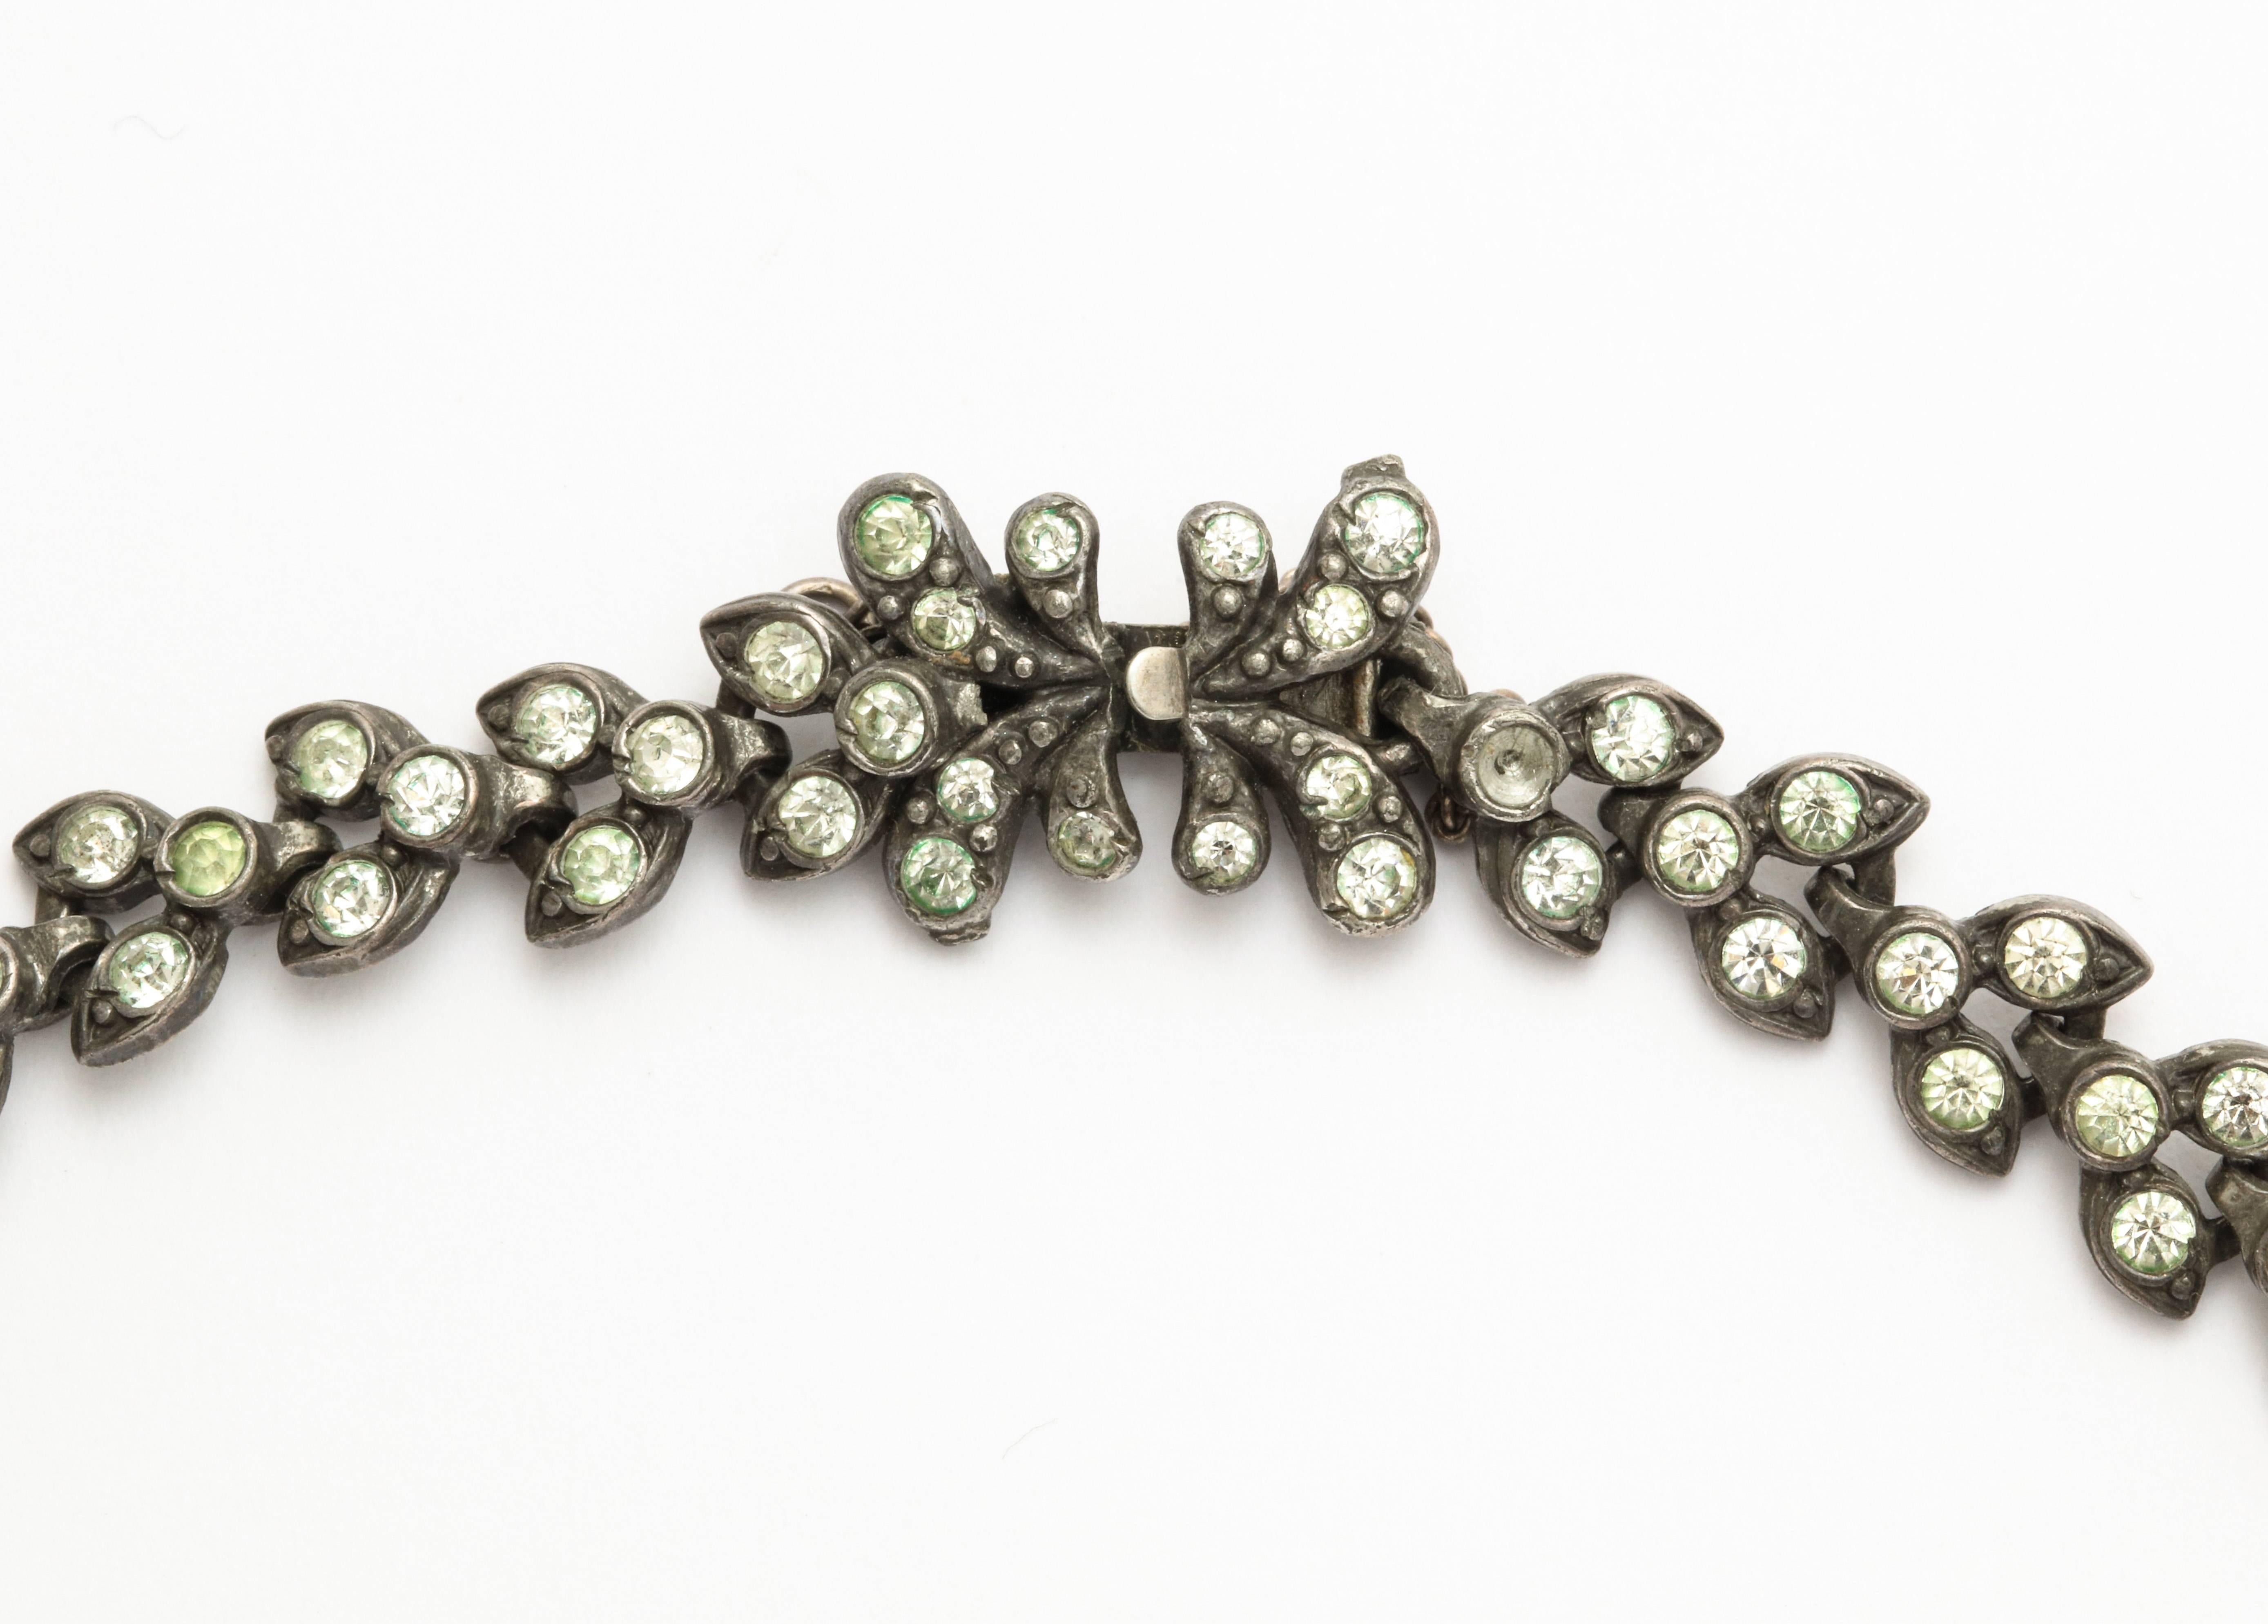 A wonderful antique paste necklace from France circa 1830s with stones set in silver